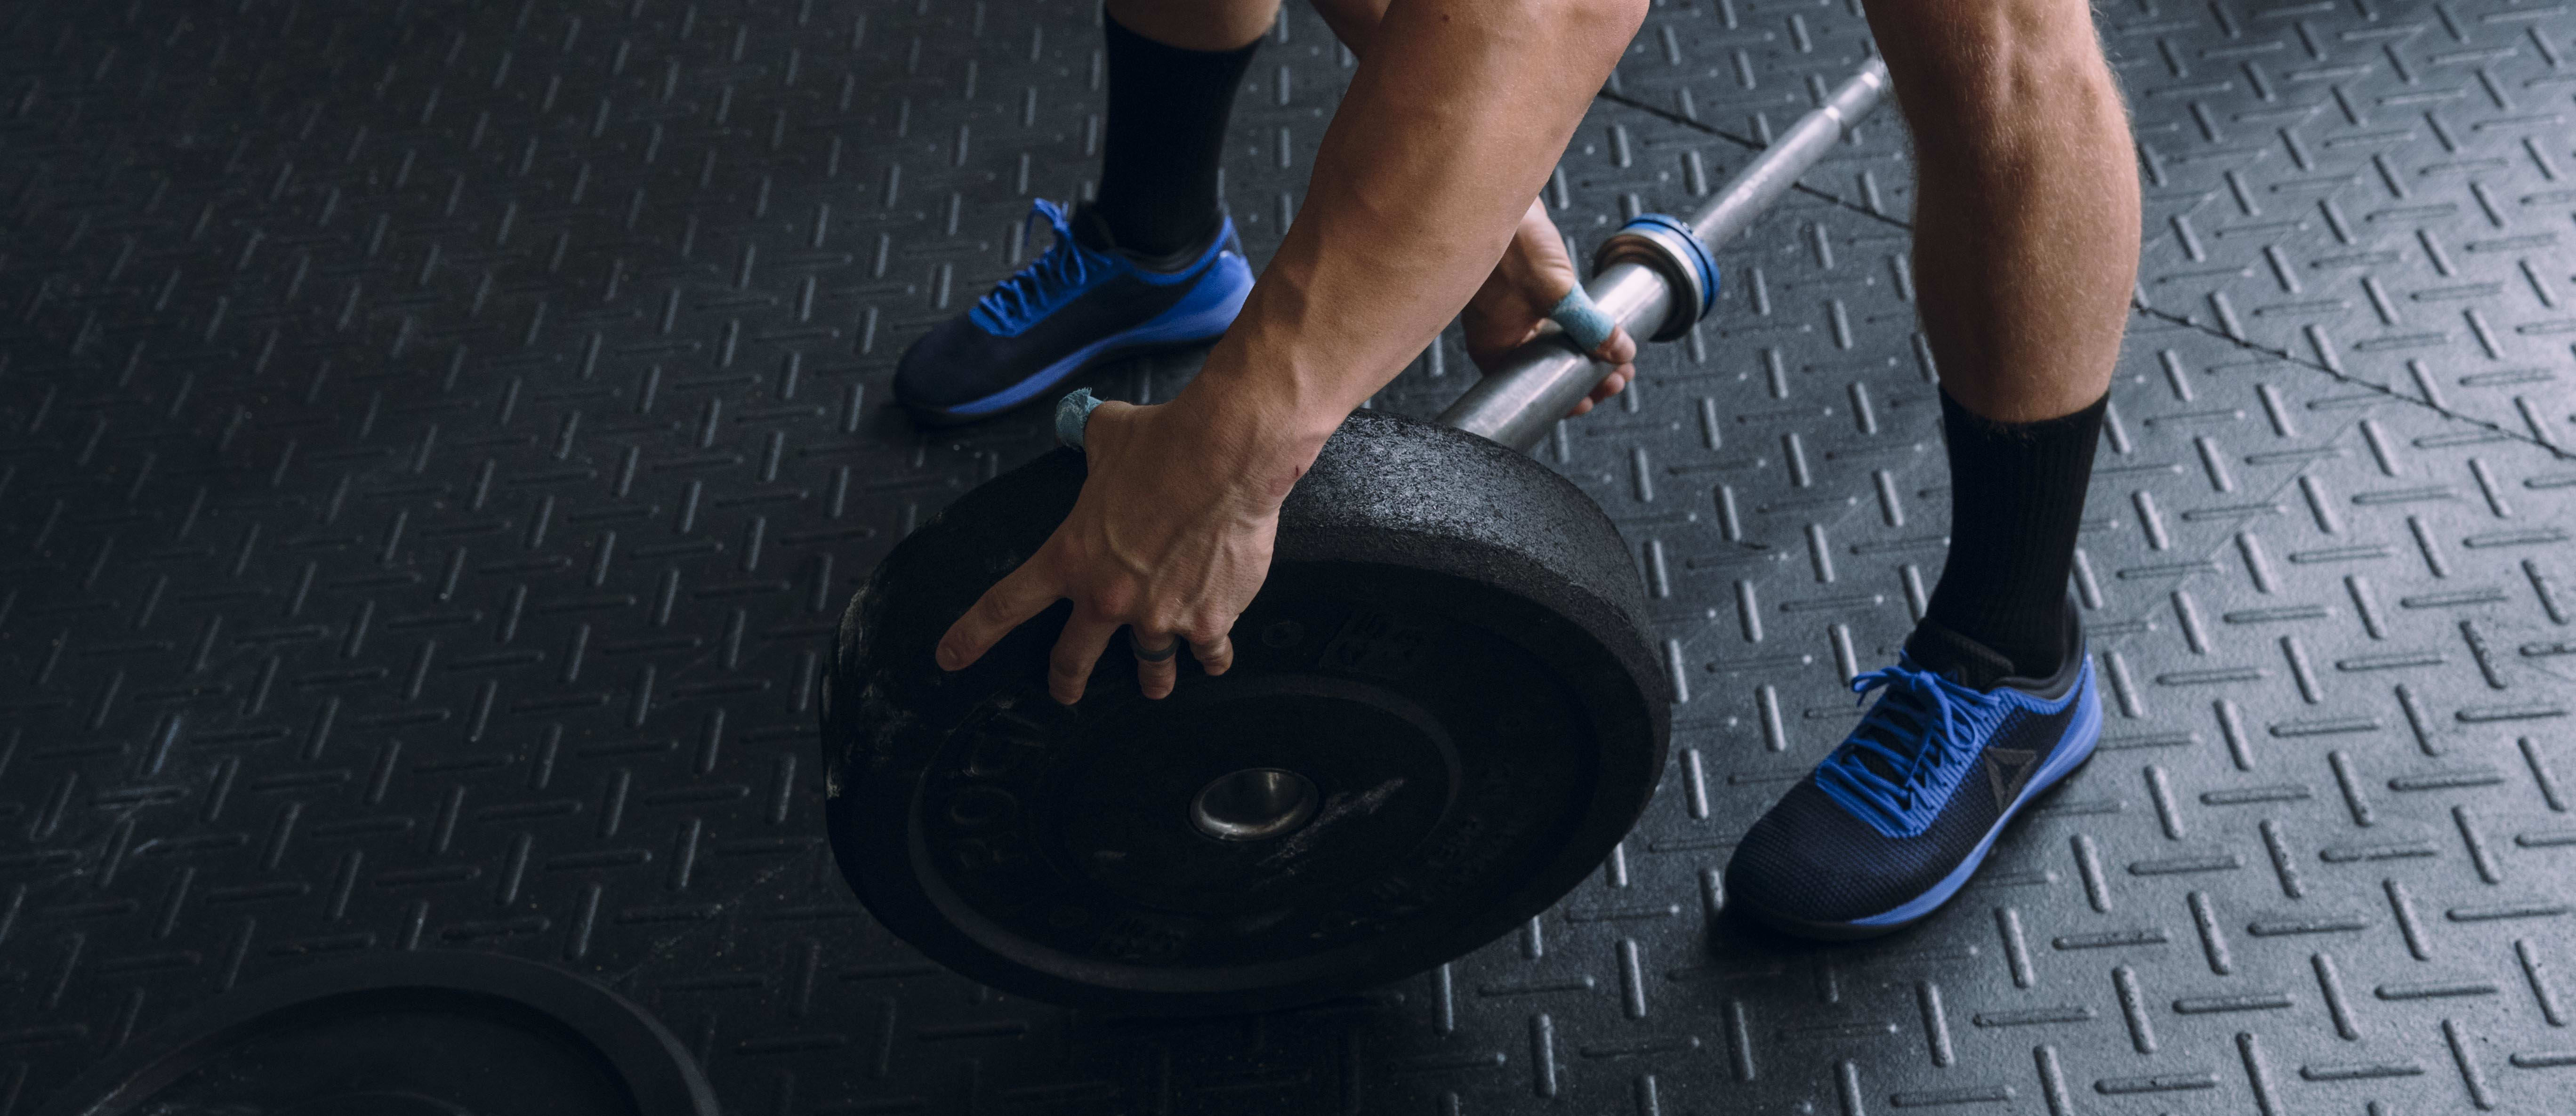 best crossfit trainers 2019